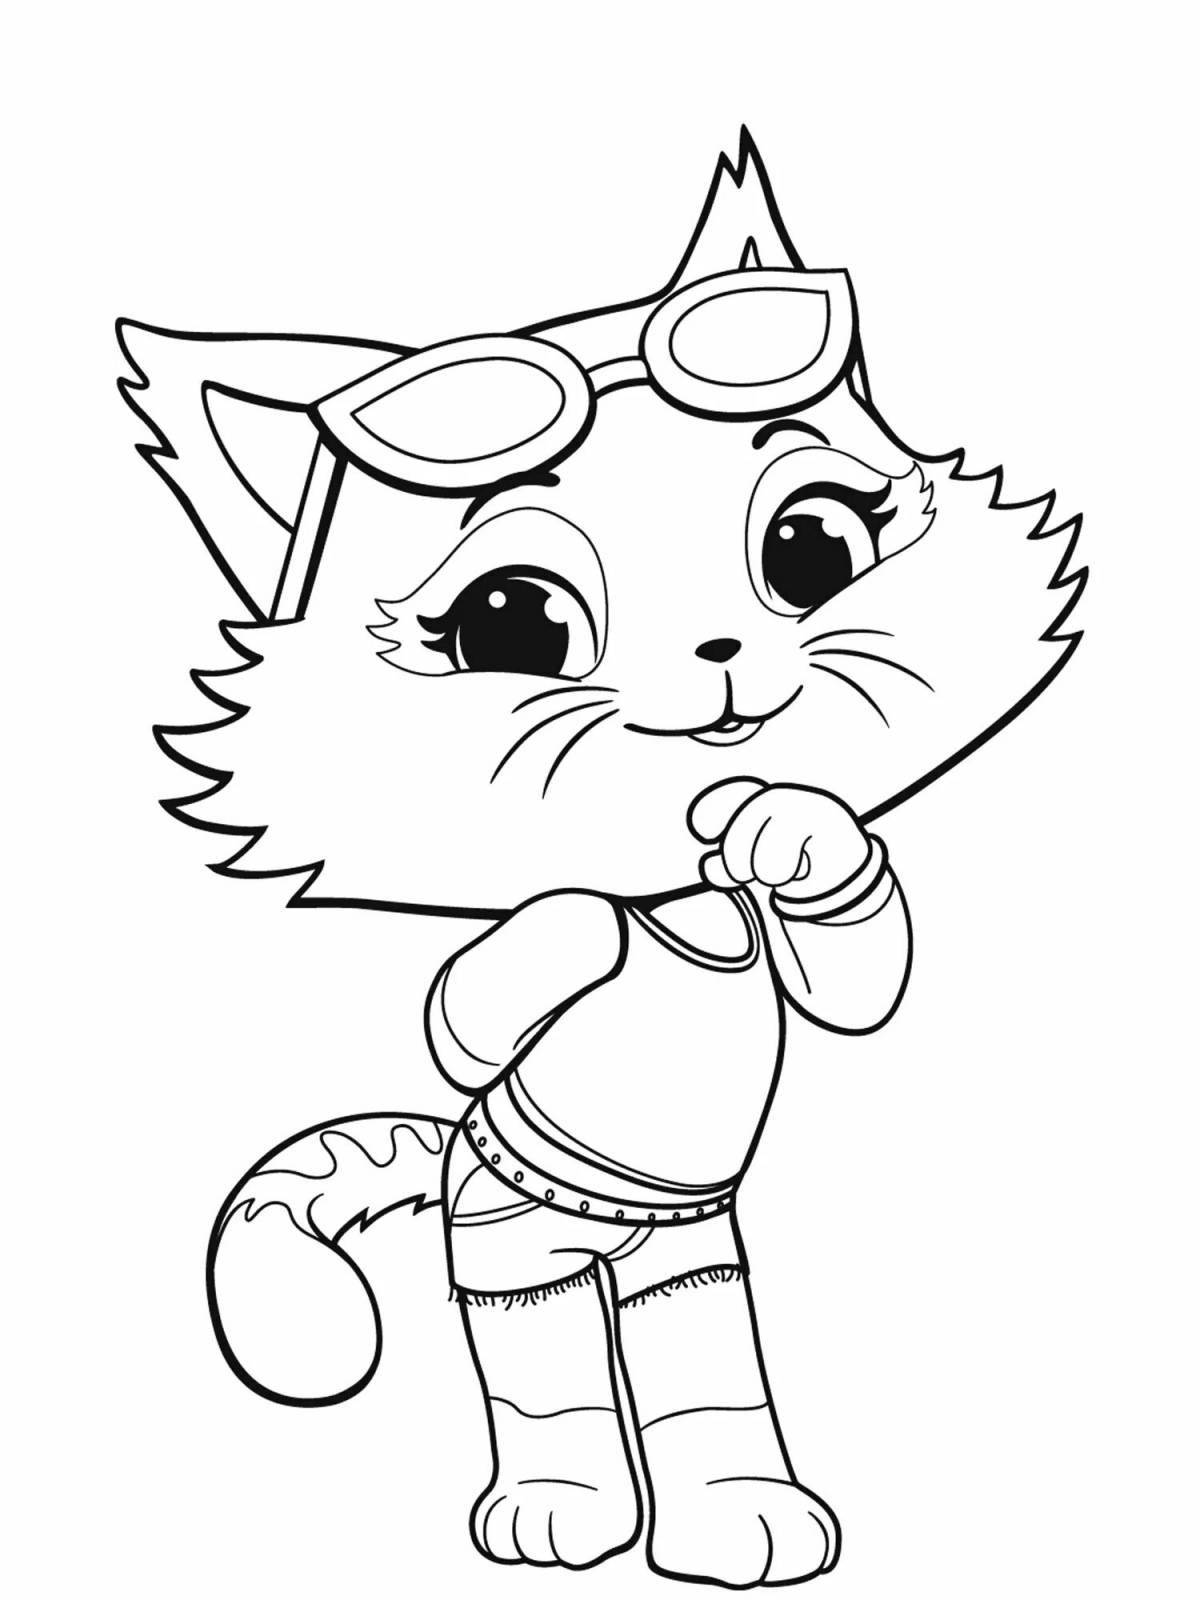 Coloring page of outgoing cat bubu